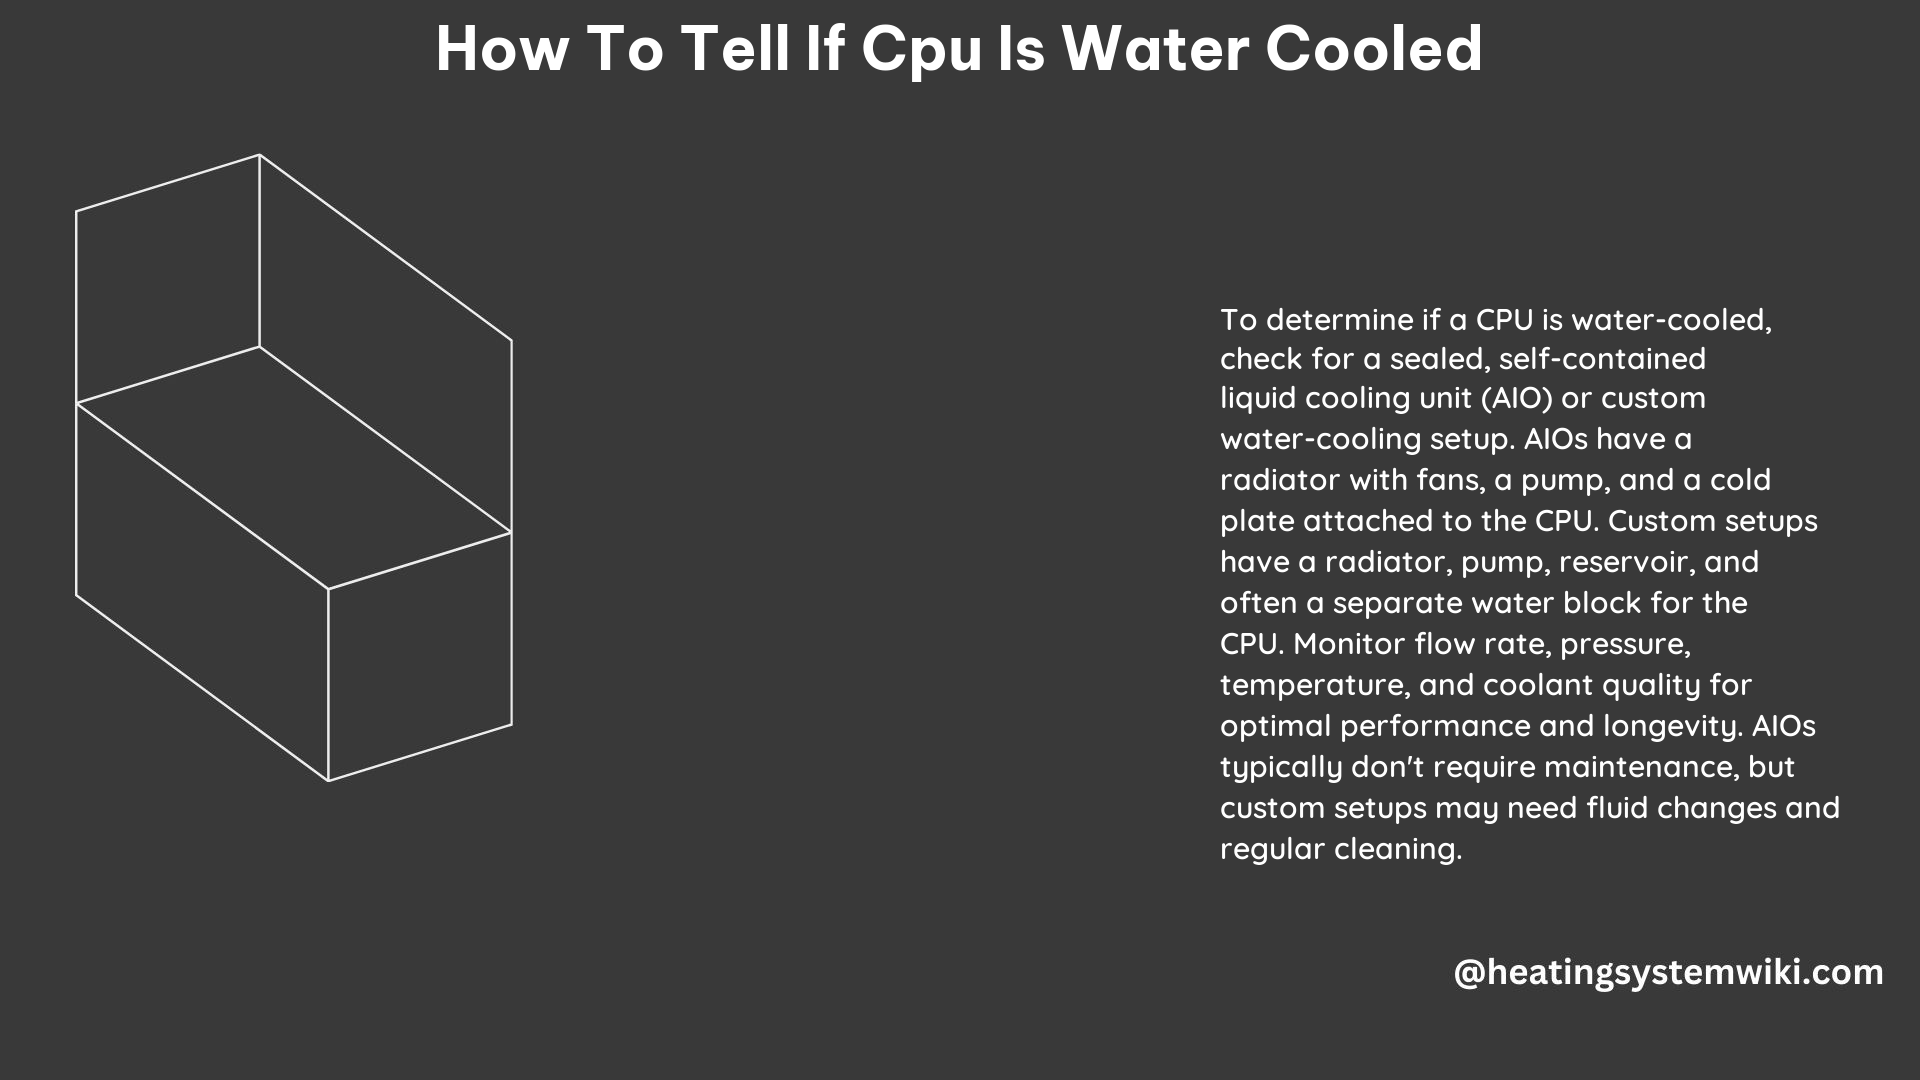 How to Tell if CPU Is Water Cooled